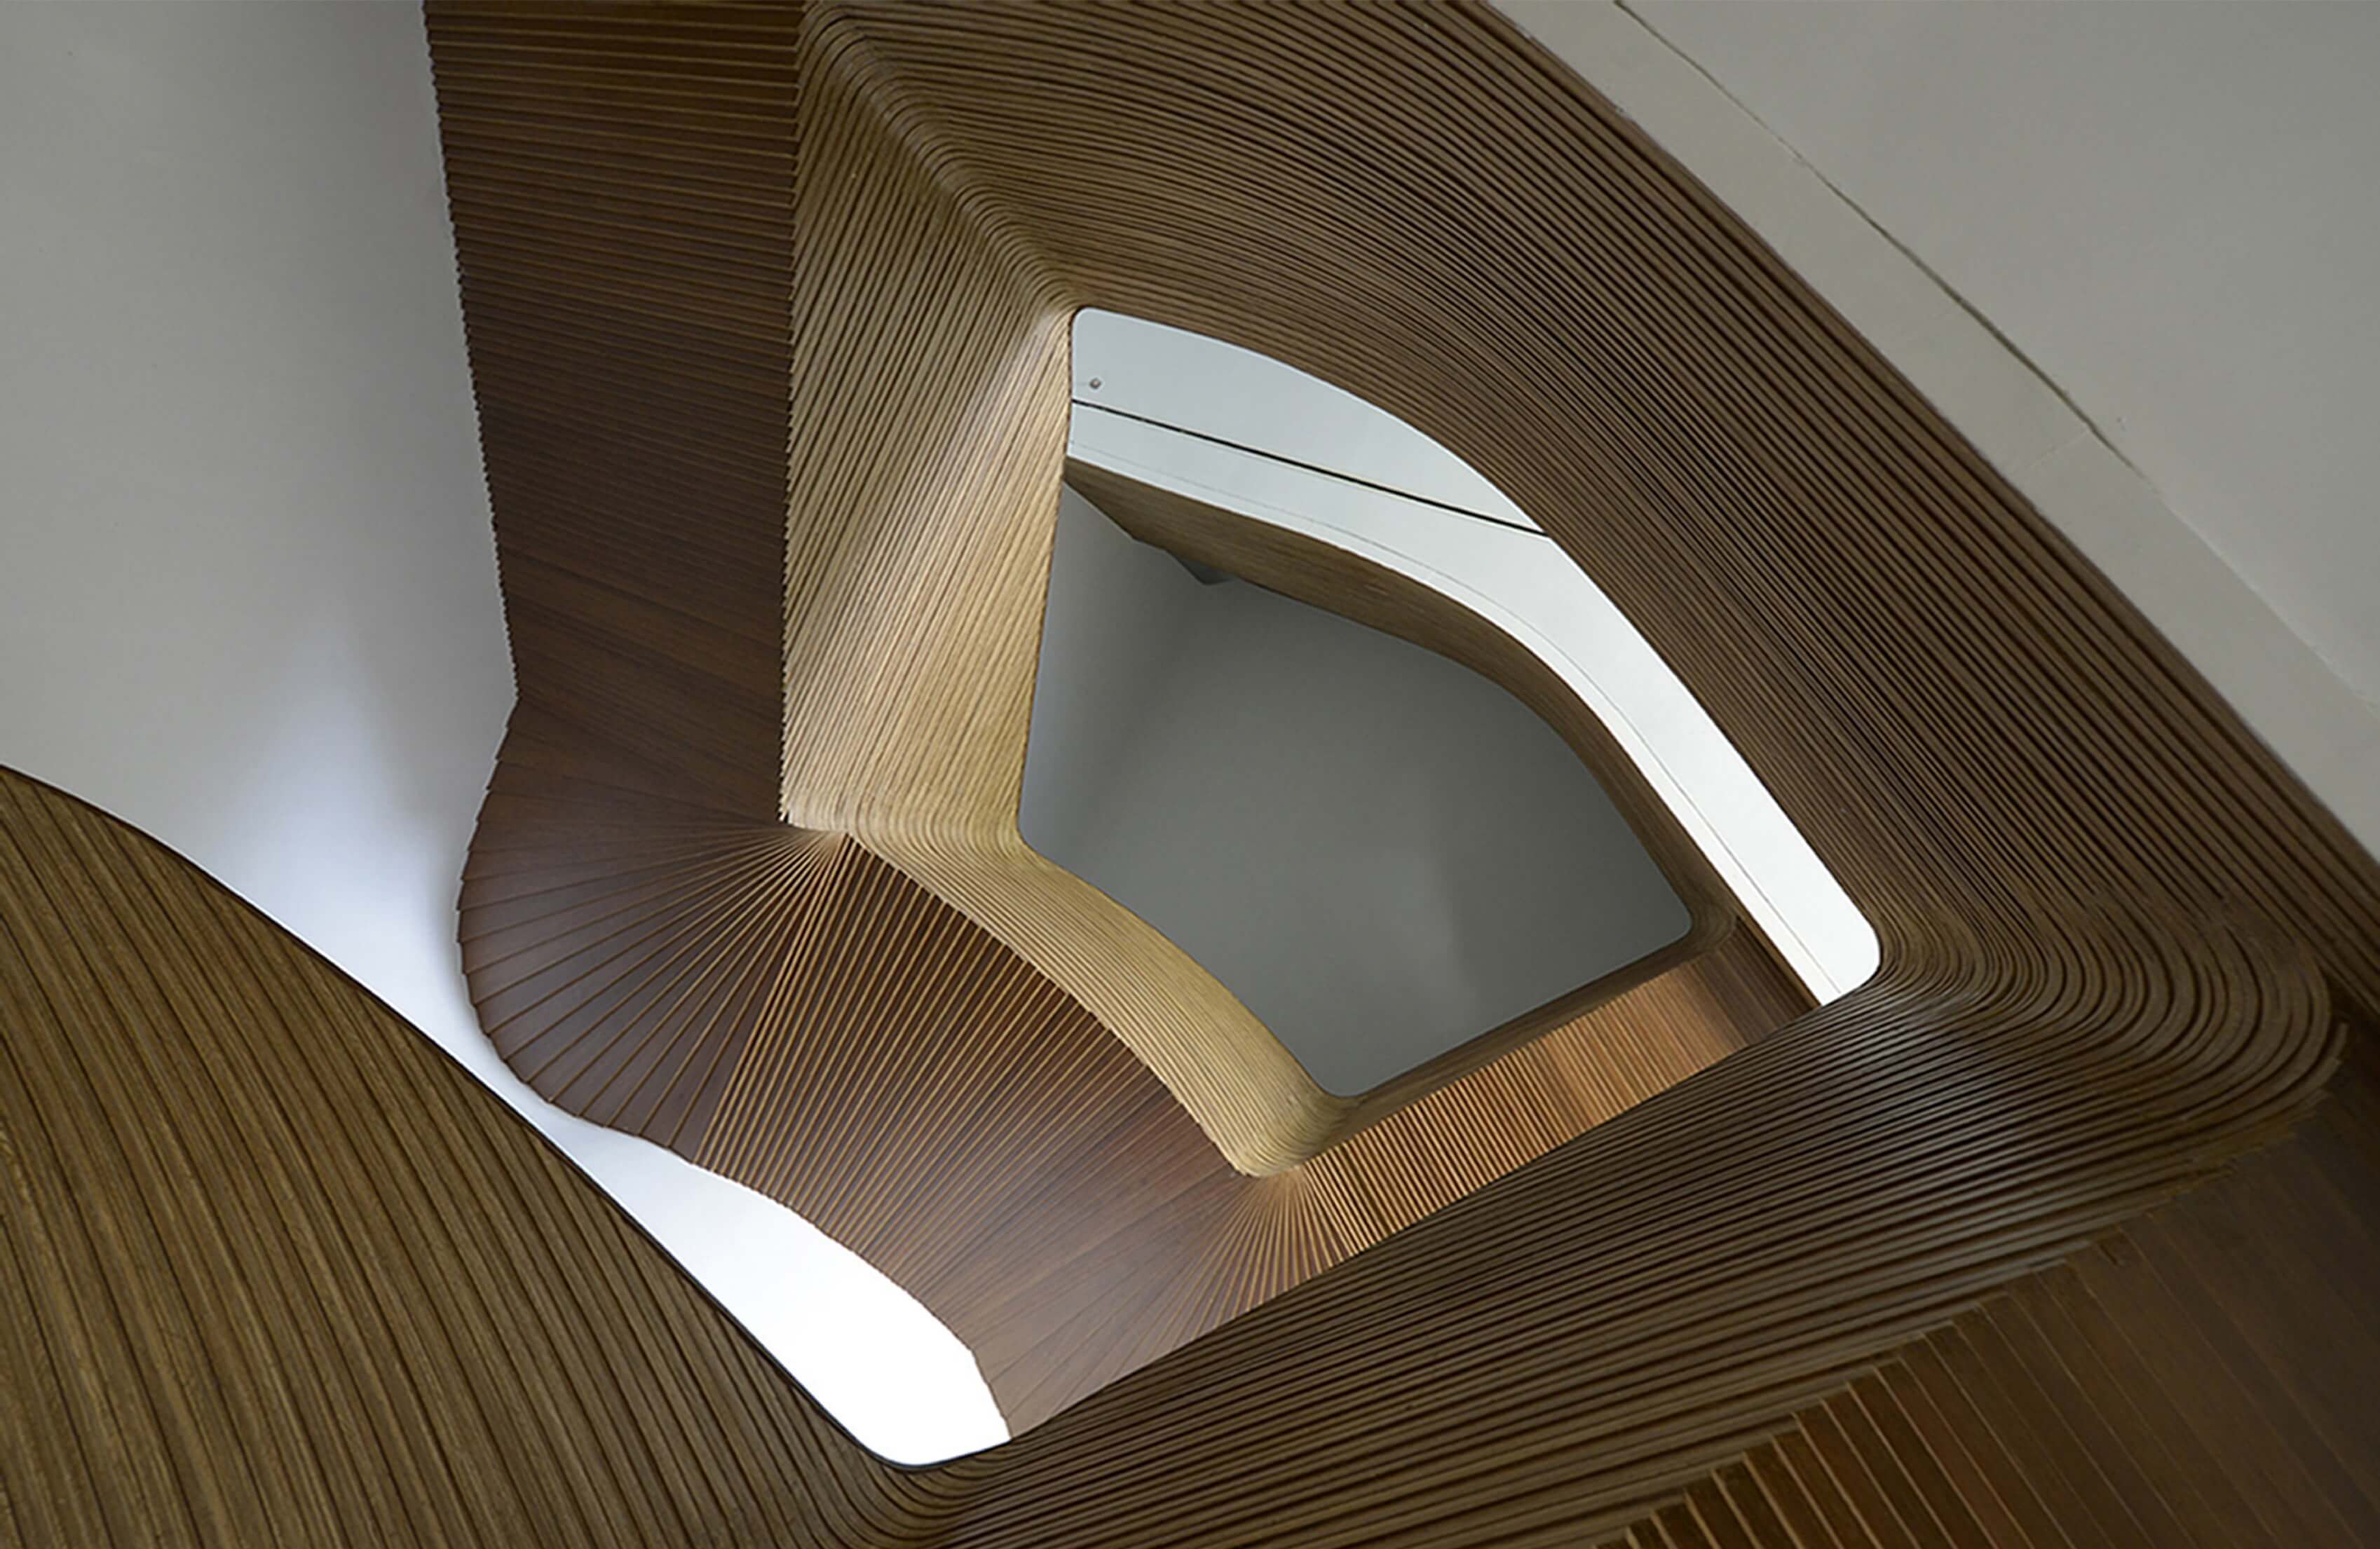 The spiraling stairway through the arts spaces